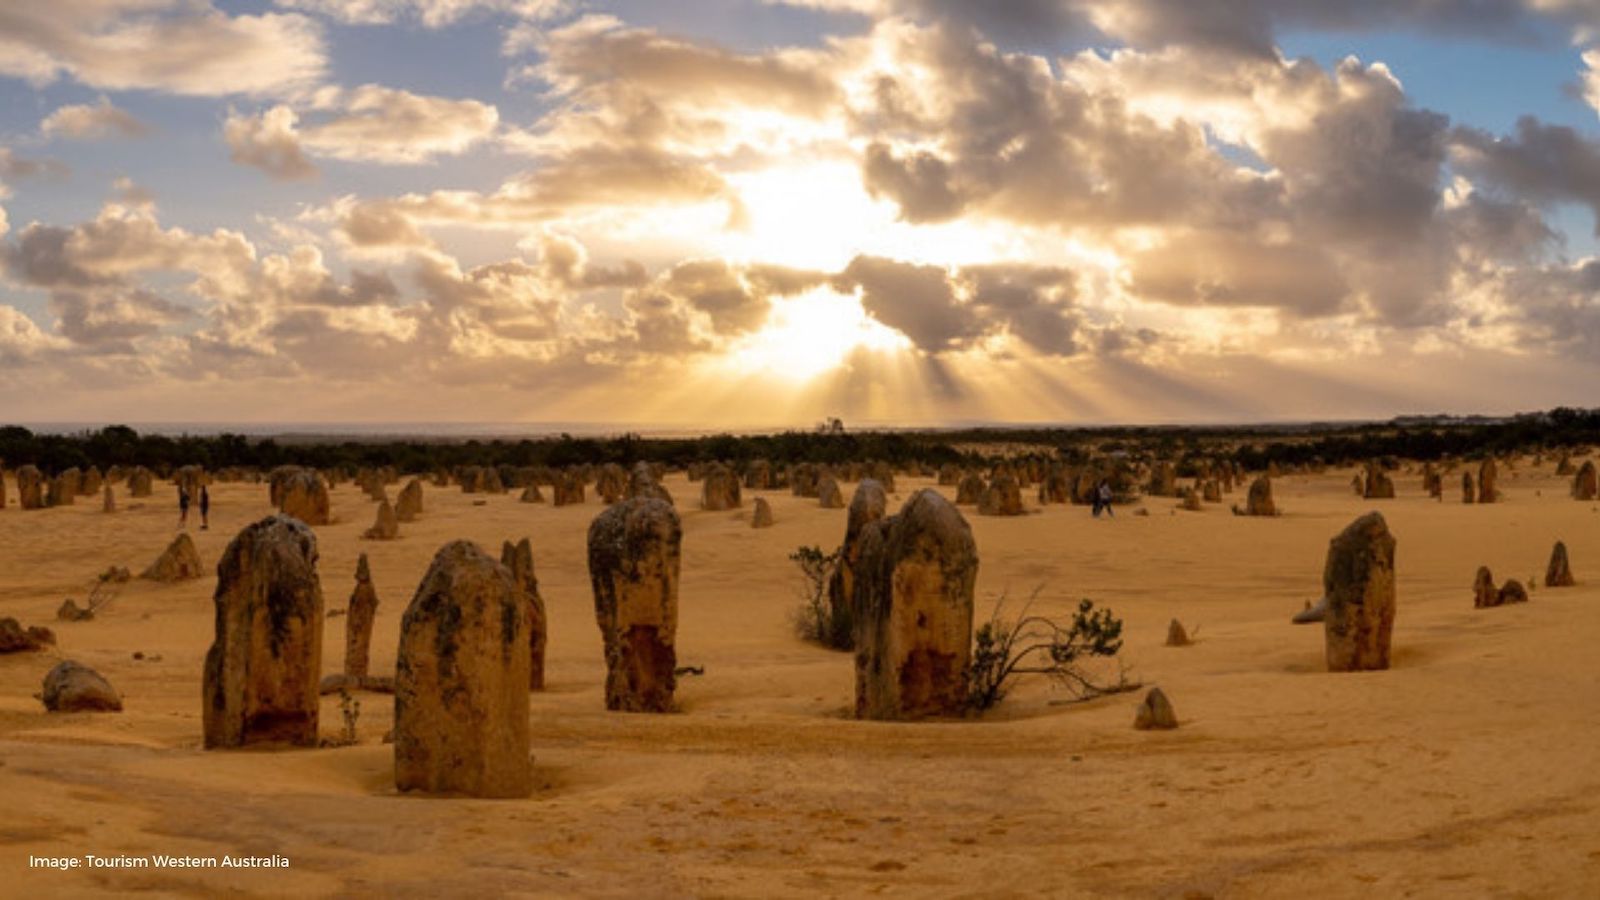 Ancient orange limestone structures coming out of orange dirt ground | Tourism Western Australia